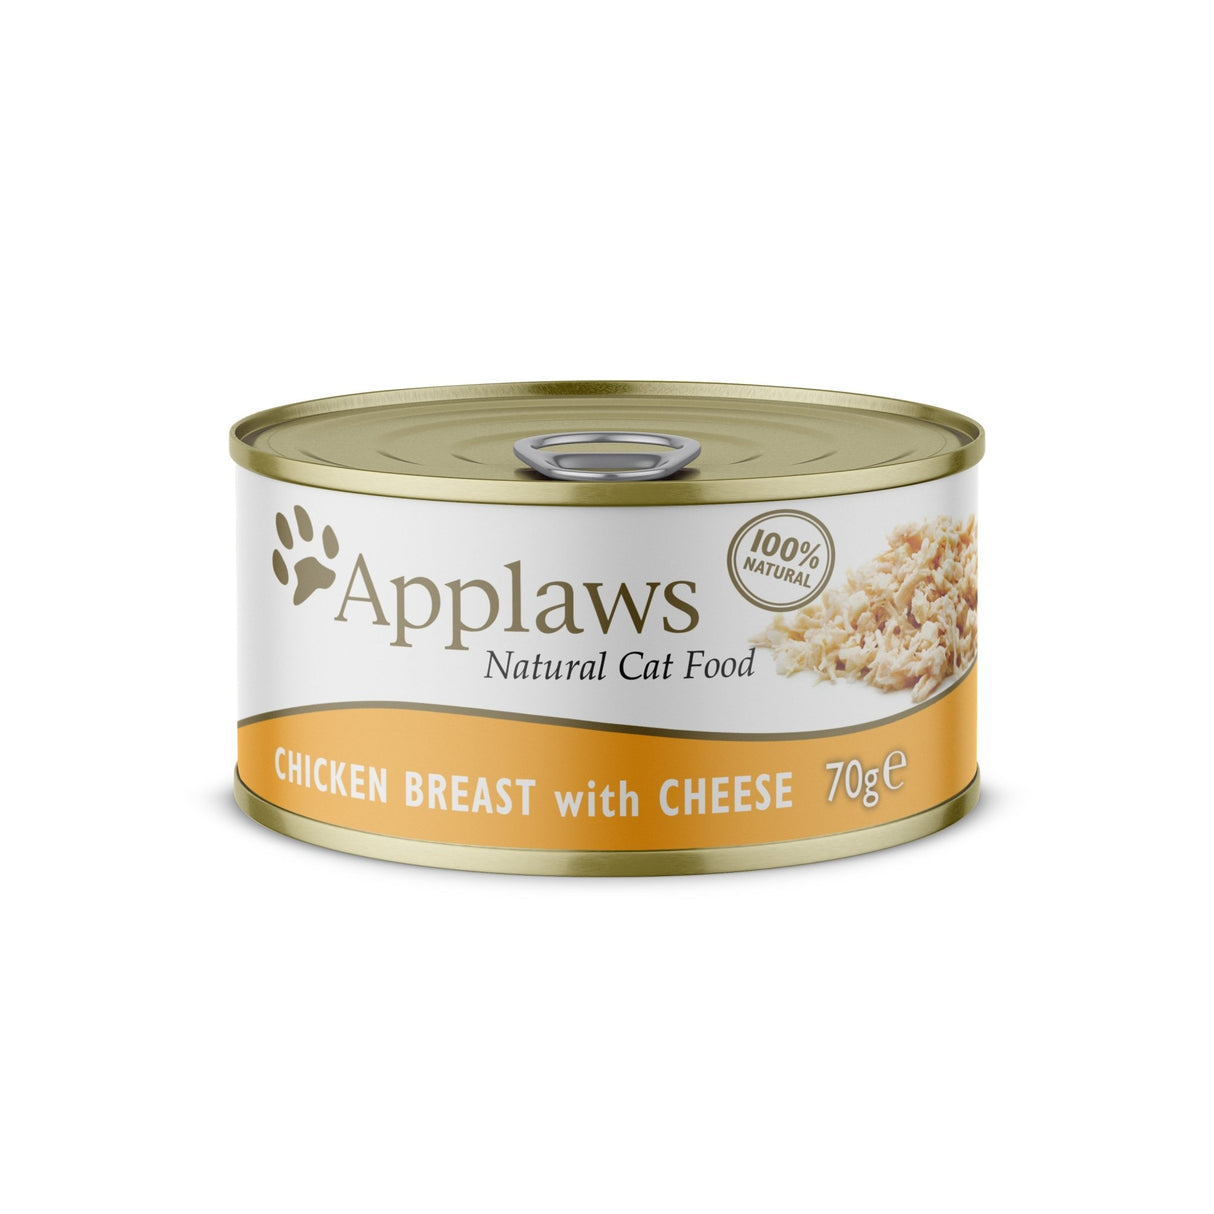 Applaws Cat Chicken Breast with Cheese in Broth Tins, Applaws, 24x70g